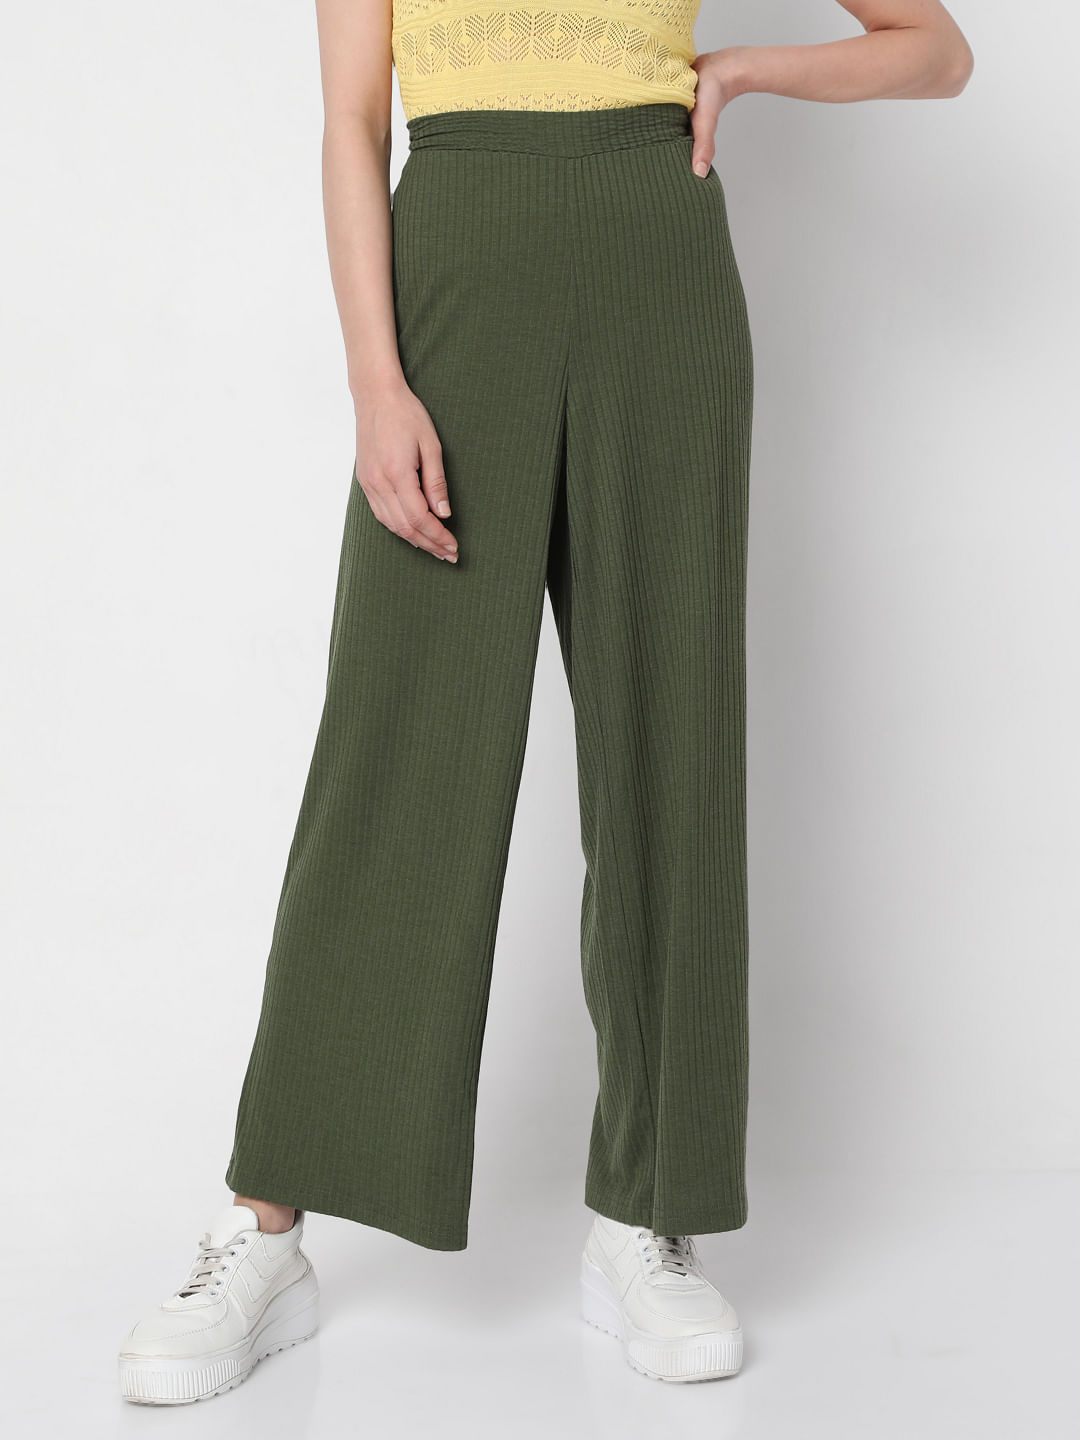 Grey Contrast Ribbed Wide Leg Trousers  PrettyLittleThing